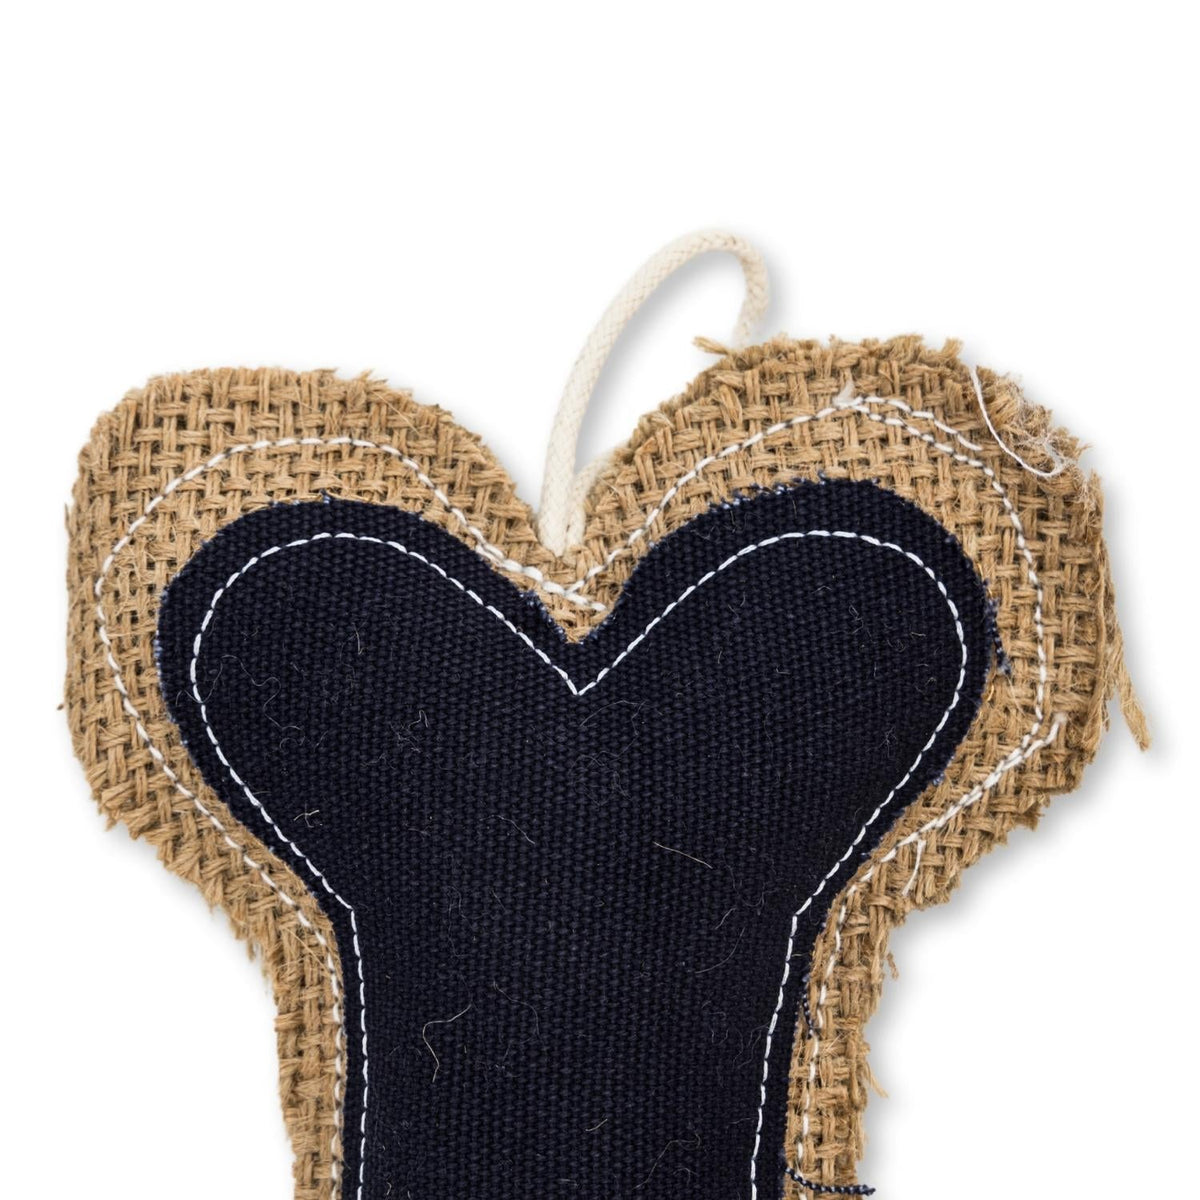 Sustainable Jean Leather-Jute Bone Pillow Dog Chew Toy by American Pet Supplies